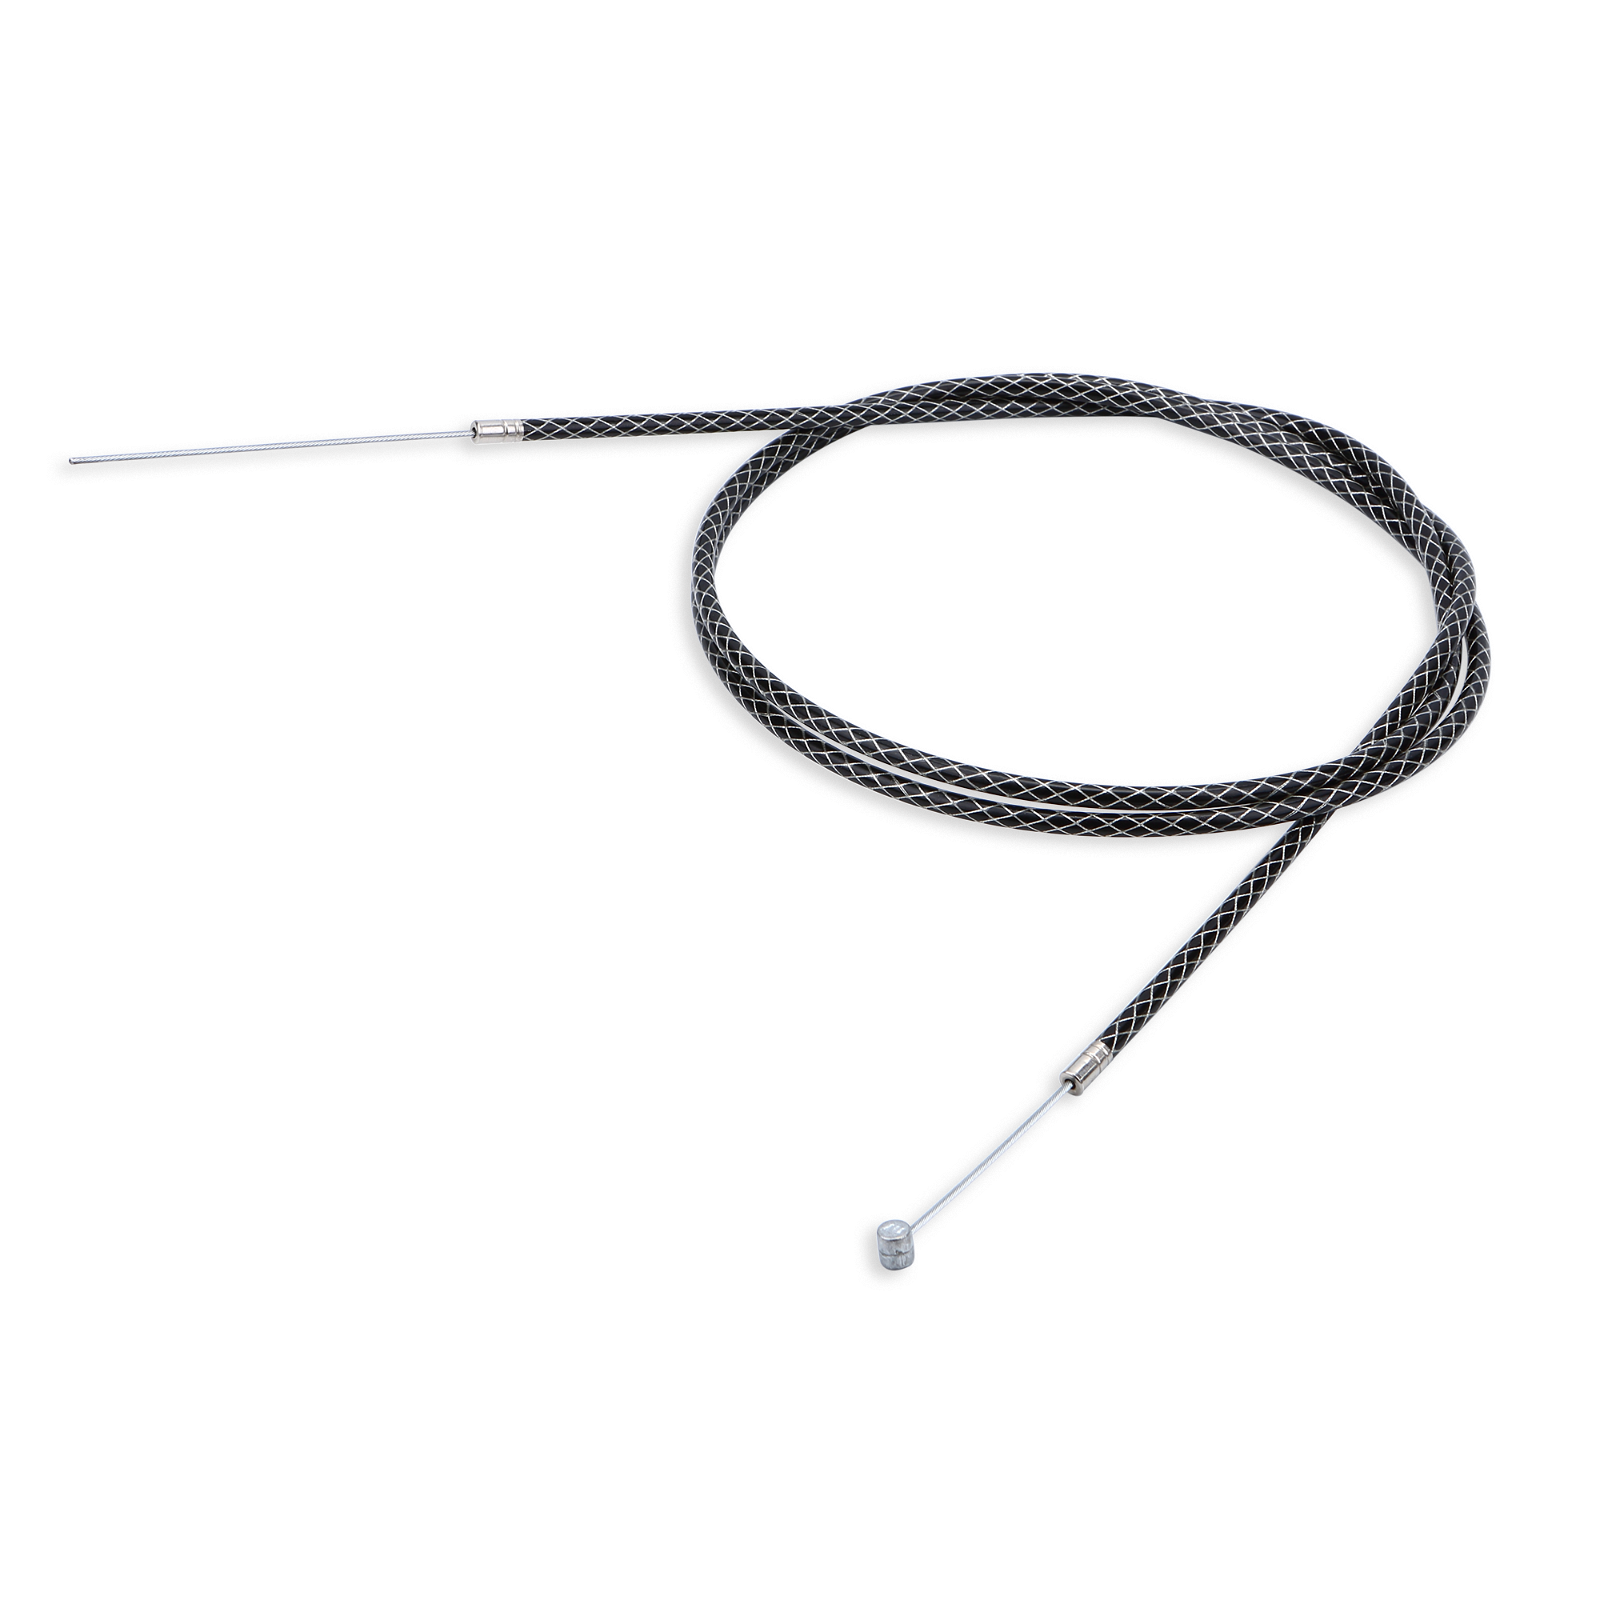 High-carbon steel brake cable for mountain bicycle